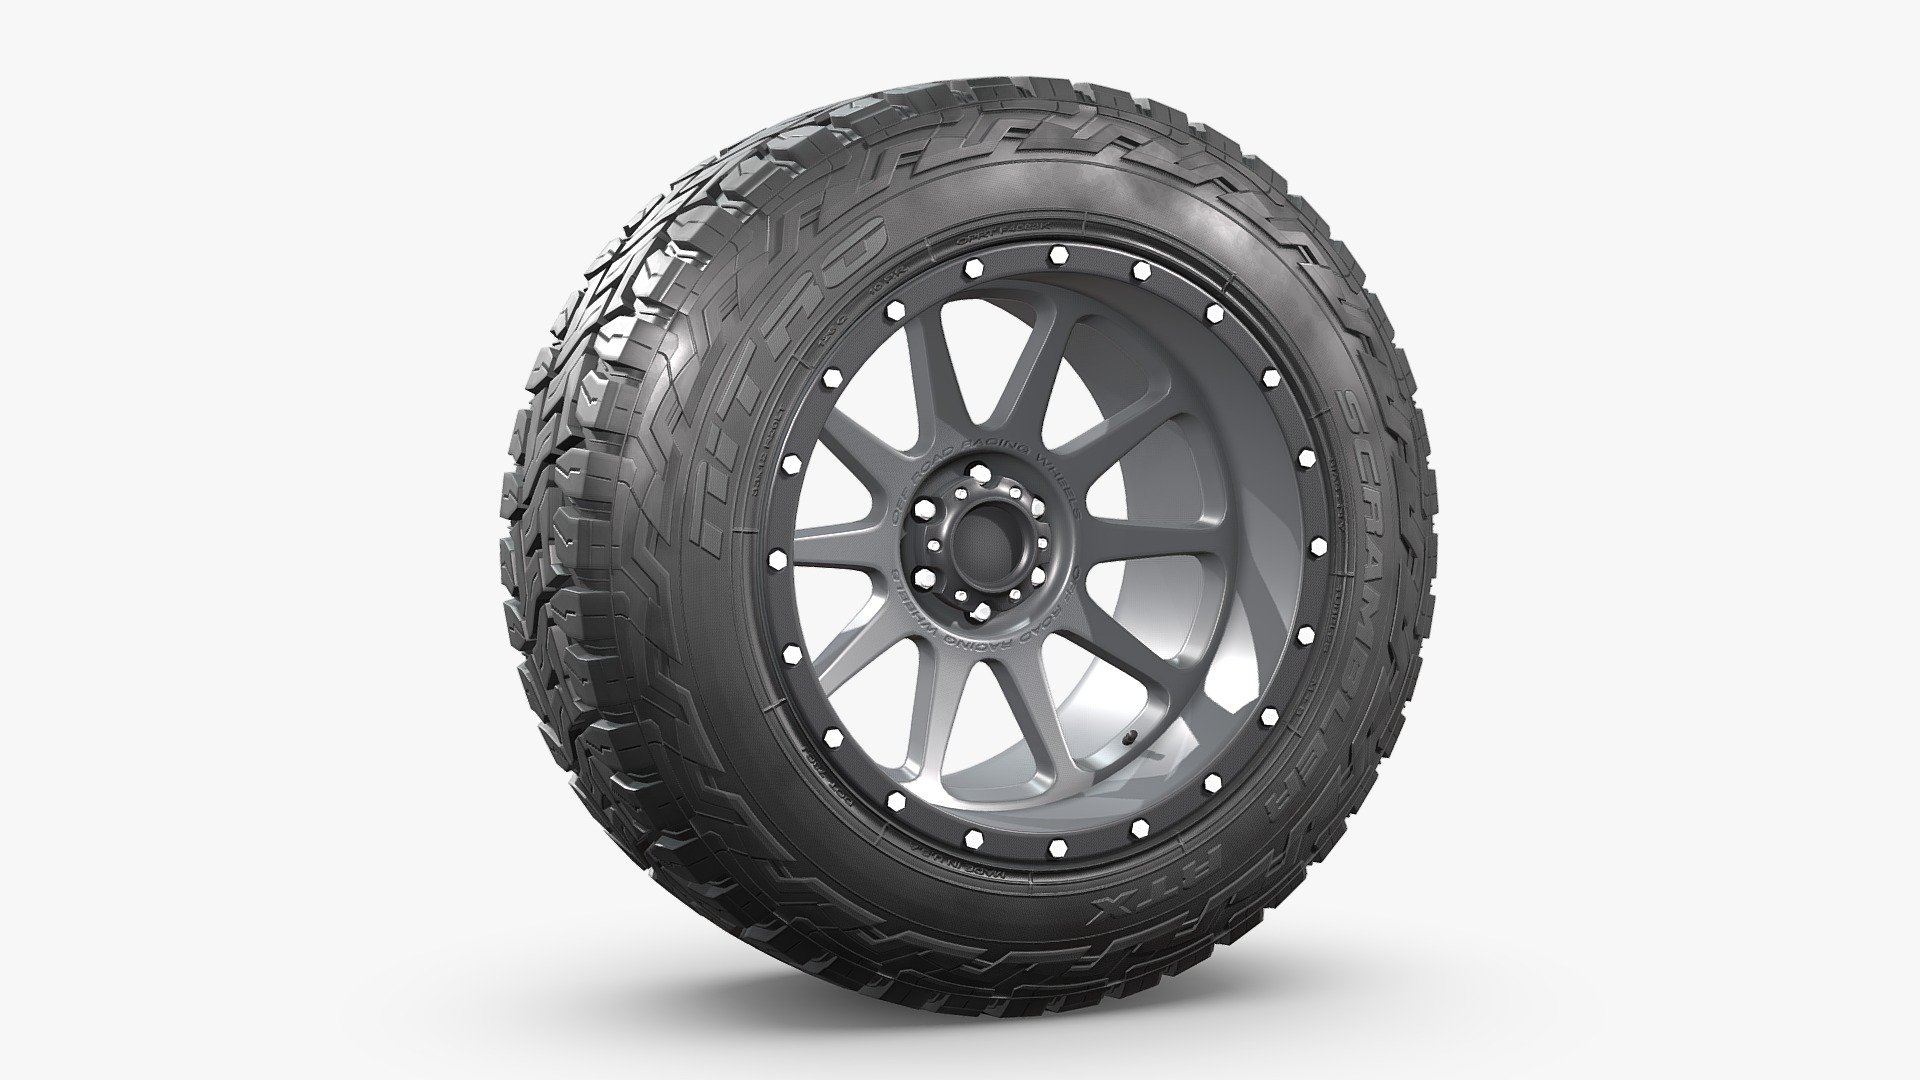 NN 3D store.

3D model of an off road wheel and tire combo.

The model is fully textured and was created with 3DS Max 2016 using the open subdivision modifier which has been left in the stack. There is also a Blender version.

SPECIFICATIONS:

The model has 32.500 polygons with subdivision level at 0 and 130.000 at level 1.

FBX, OBJ and 3DS files have been included in separated HI and LO subdivision versions.

PRESENTATION:

Renderer: V Ray and Cycles.

MATERIALS AND TEXTURES:

All materials and textures are included and mapped in all files, settings might have to be adjusted depending on the software you are using.

JPG textures have 2048 x 2048 resolution.

The model includes alternative texture colors to choose 3d model